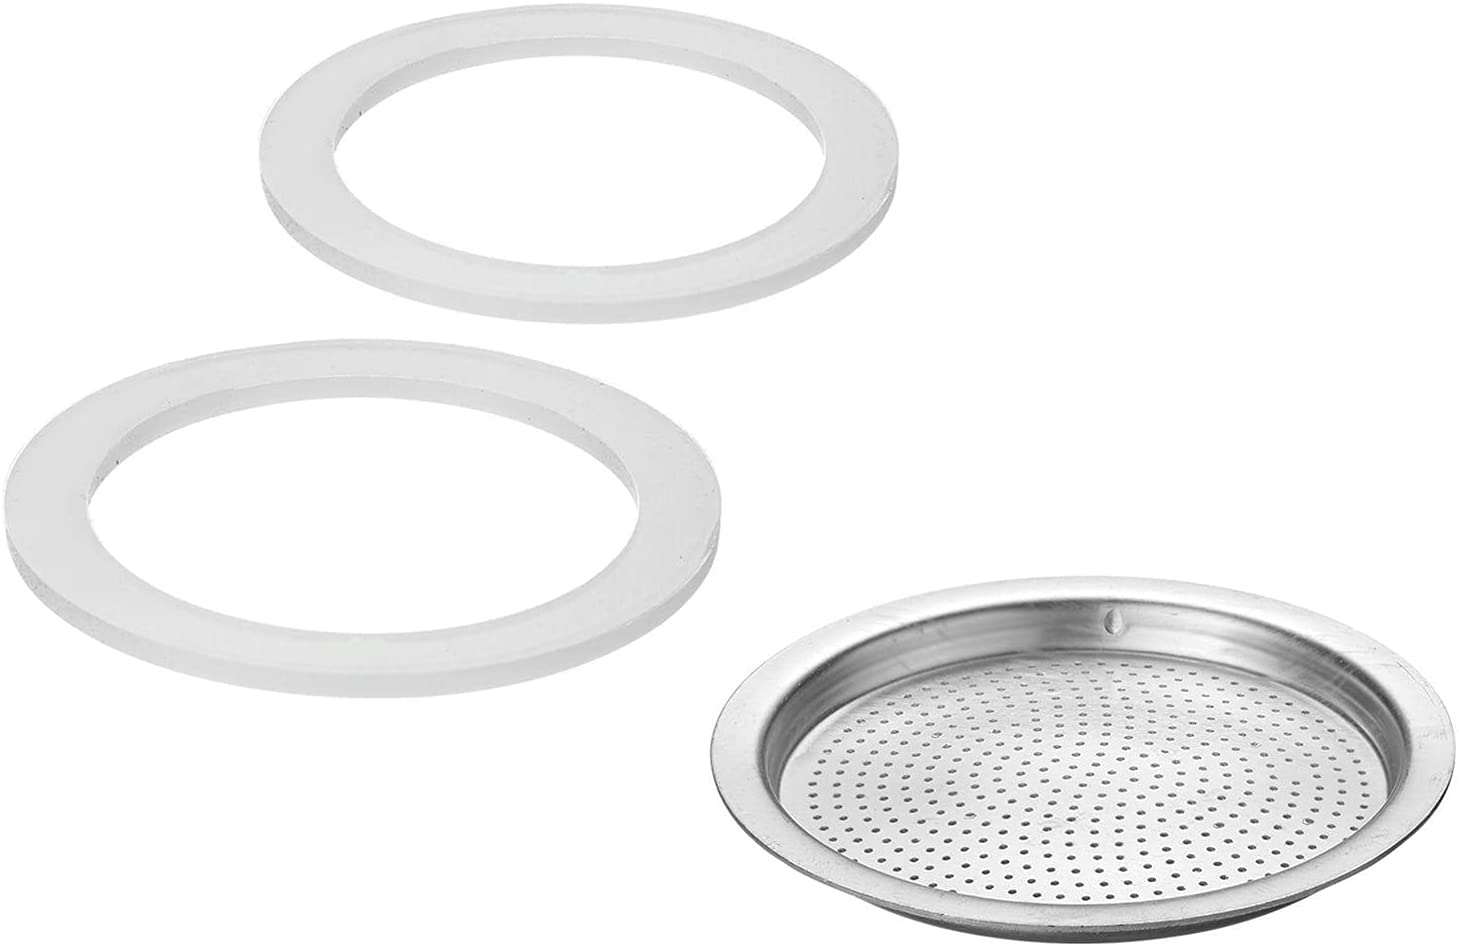 Westmark 2 Replacement Silicone Sealing Rings + 1 Replacement Filter Plate for Espresso Maker 24602260 (3 Cups) Brasilia Silicone/Stainless Steel 2460228E